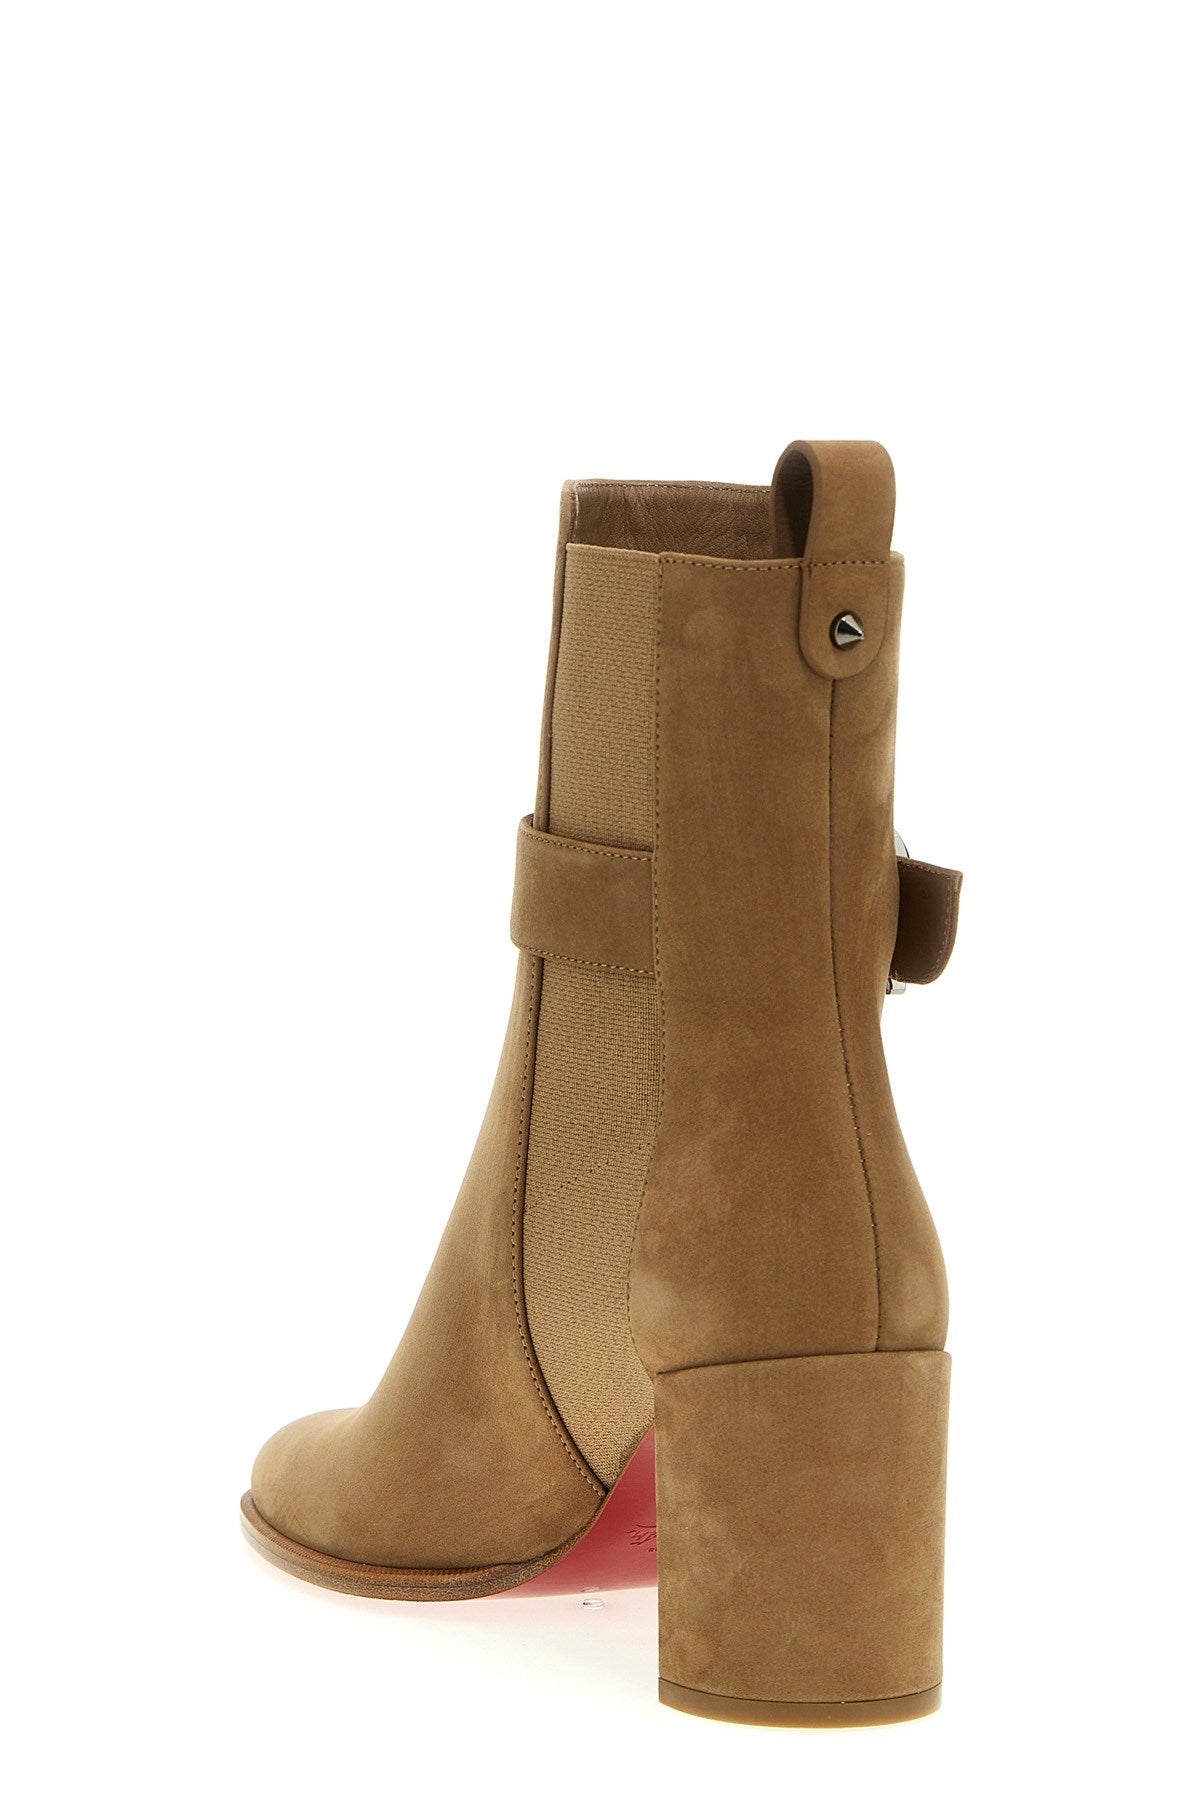 christian louboutin 'CL' ankle boots beige